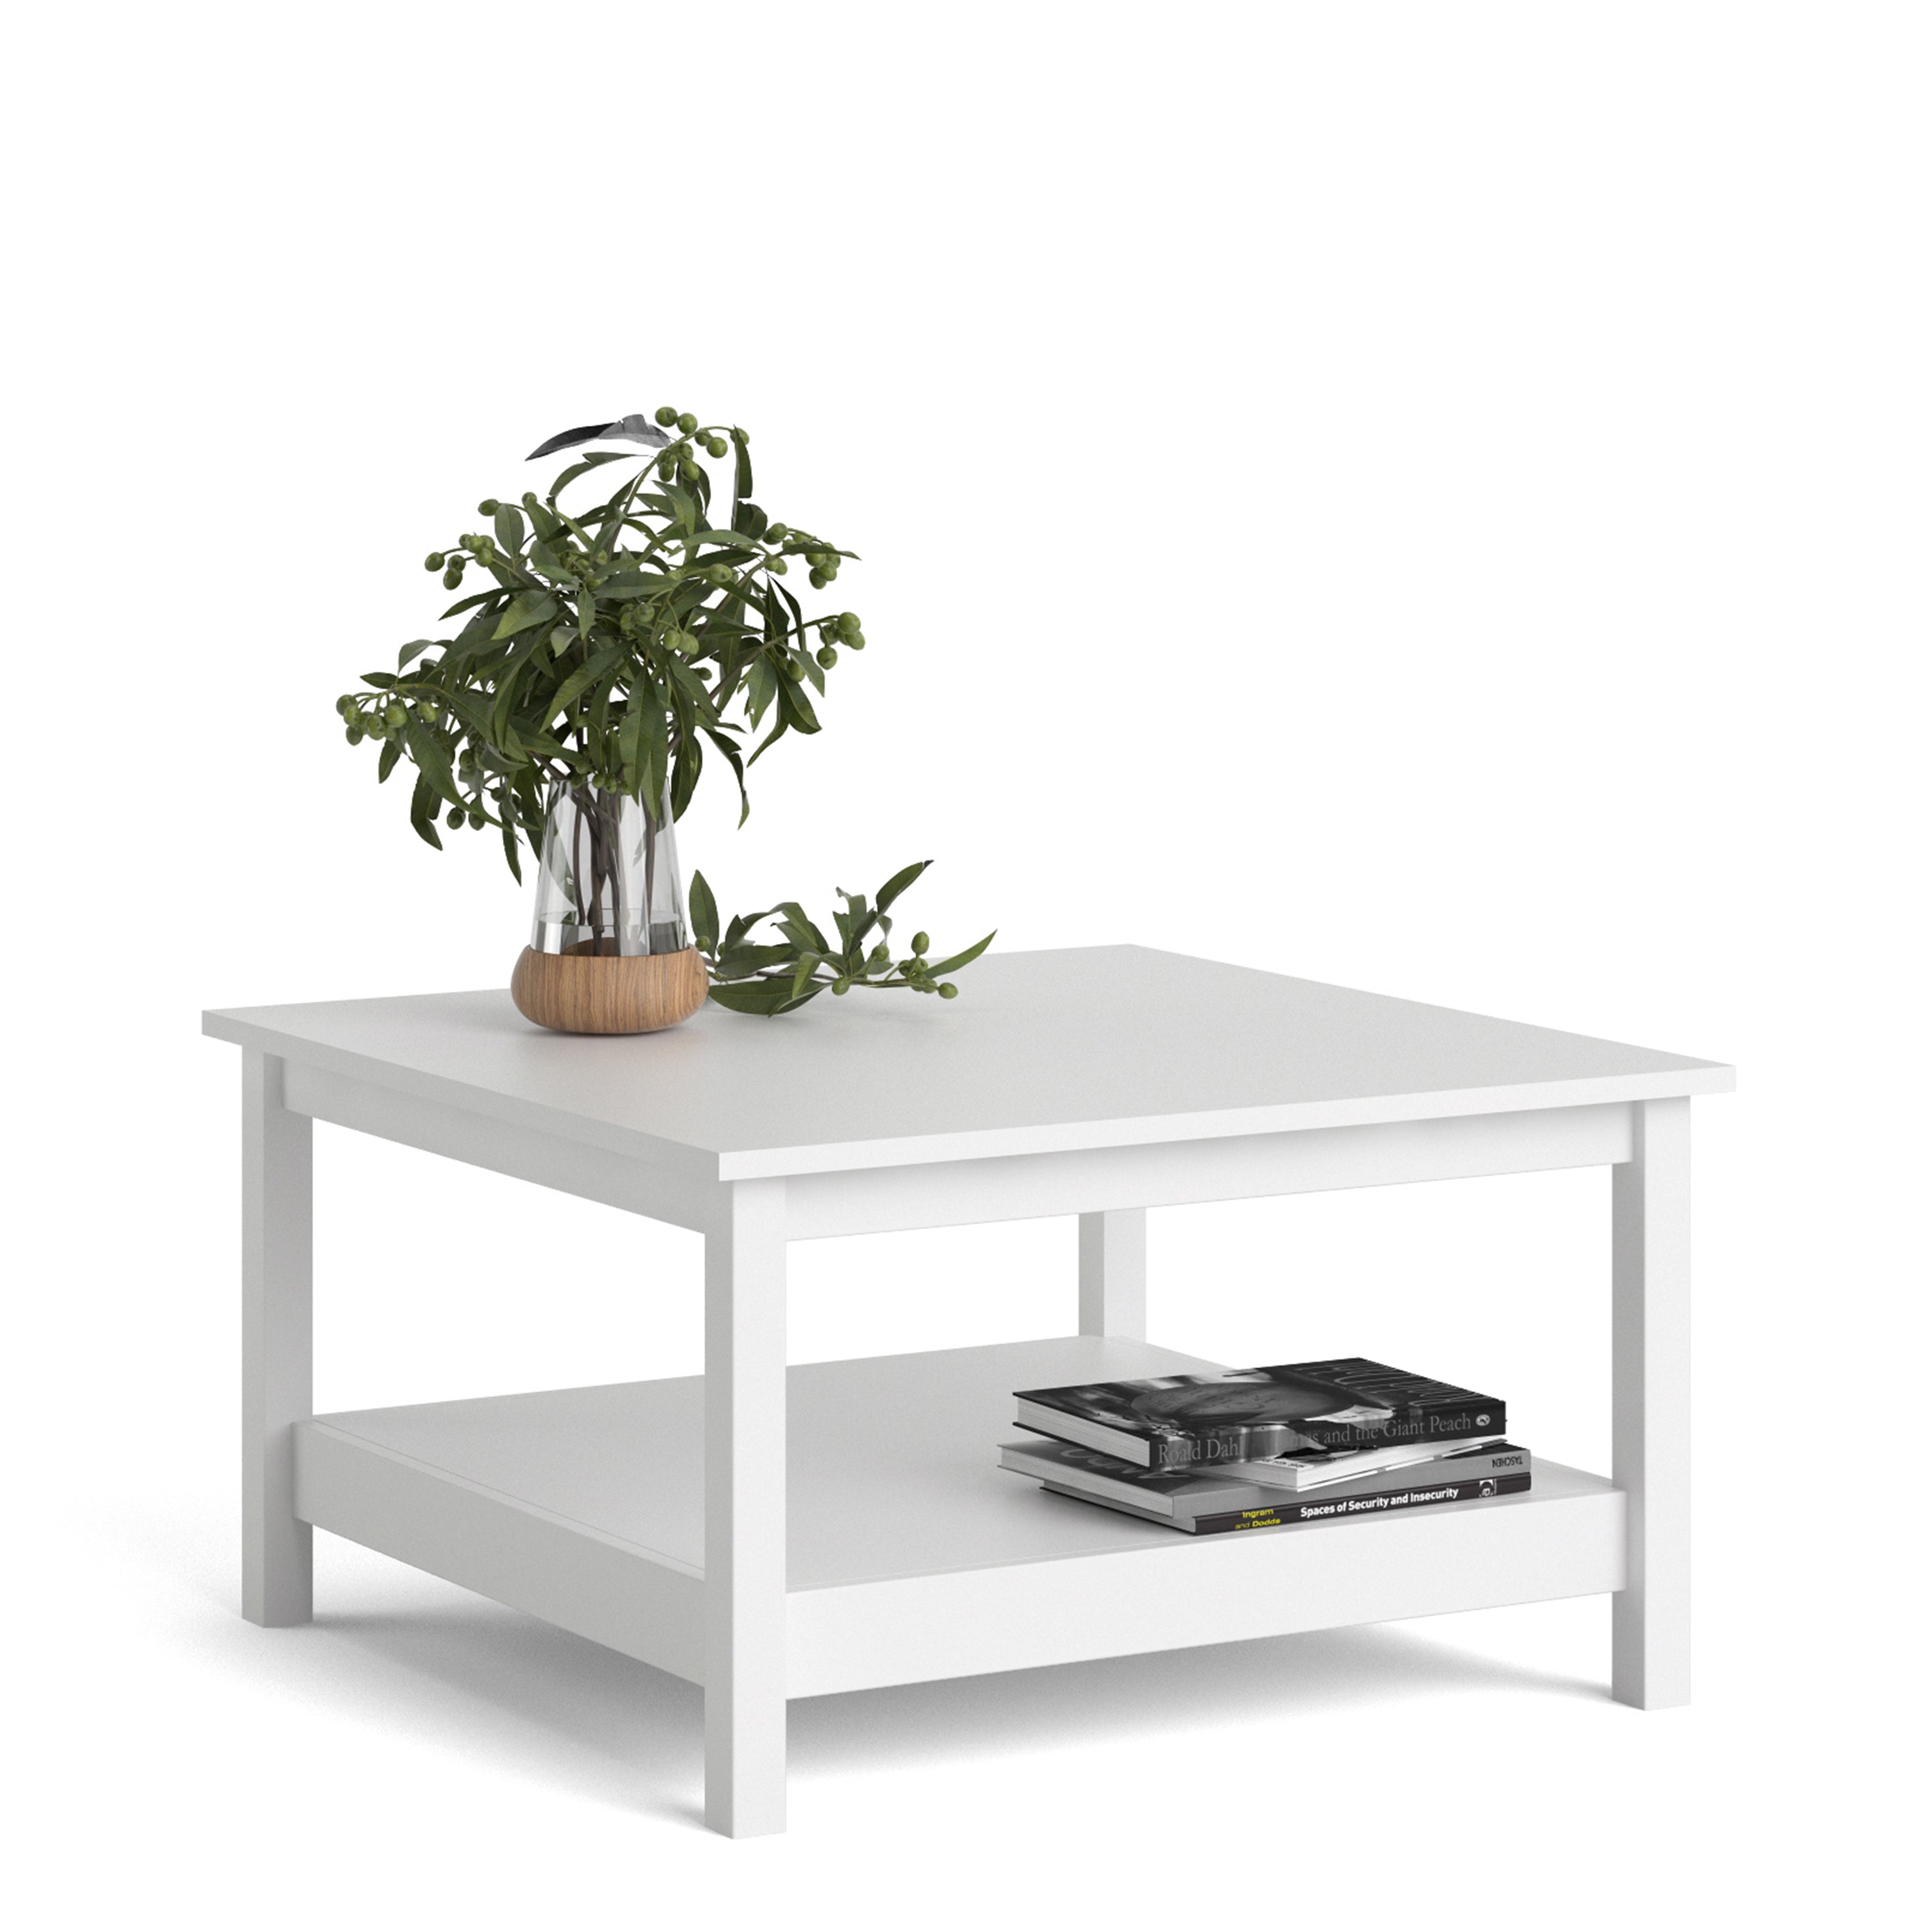 Madrid Coffee table in White